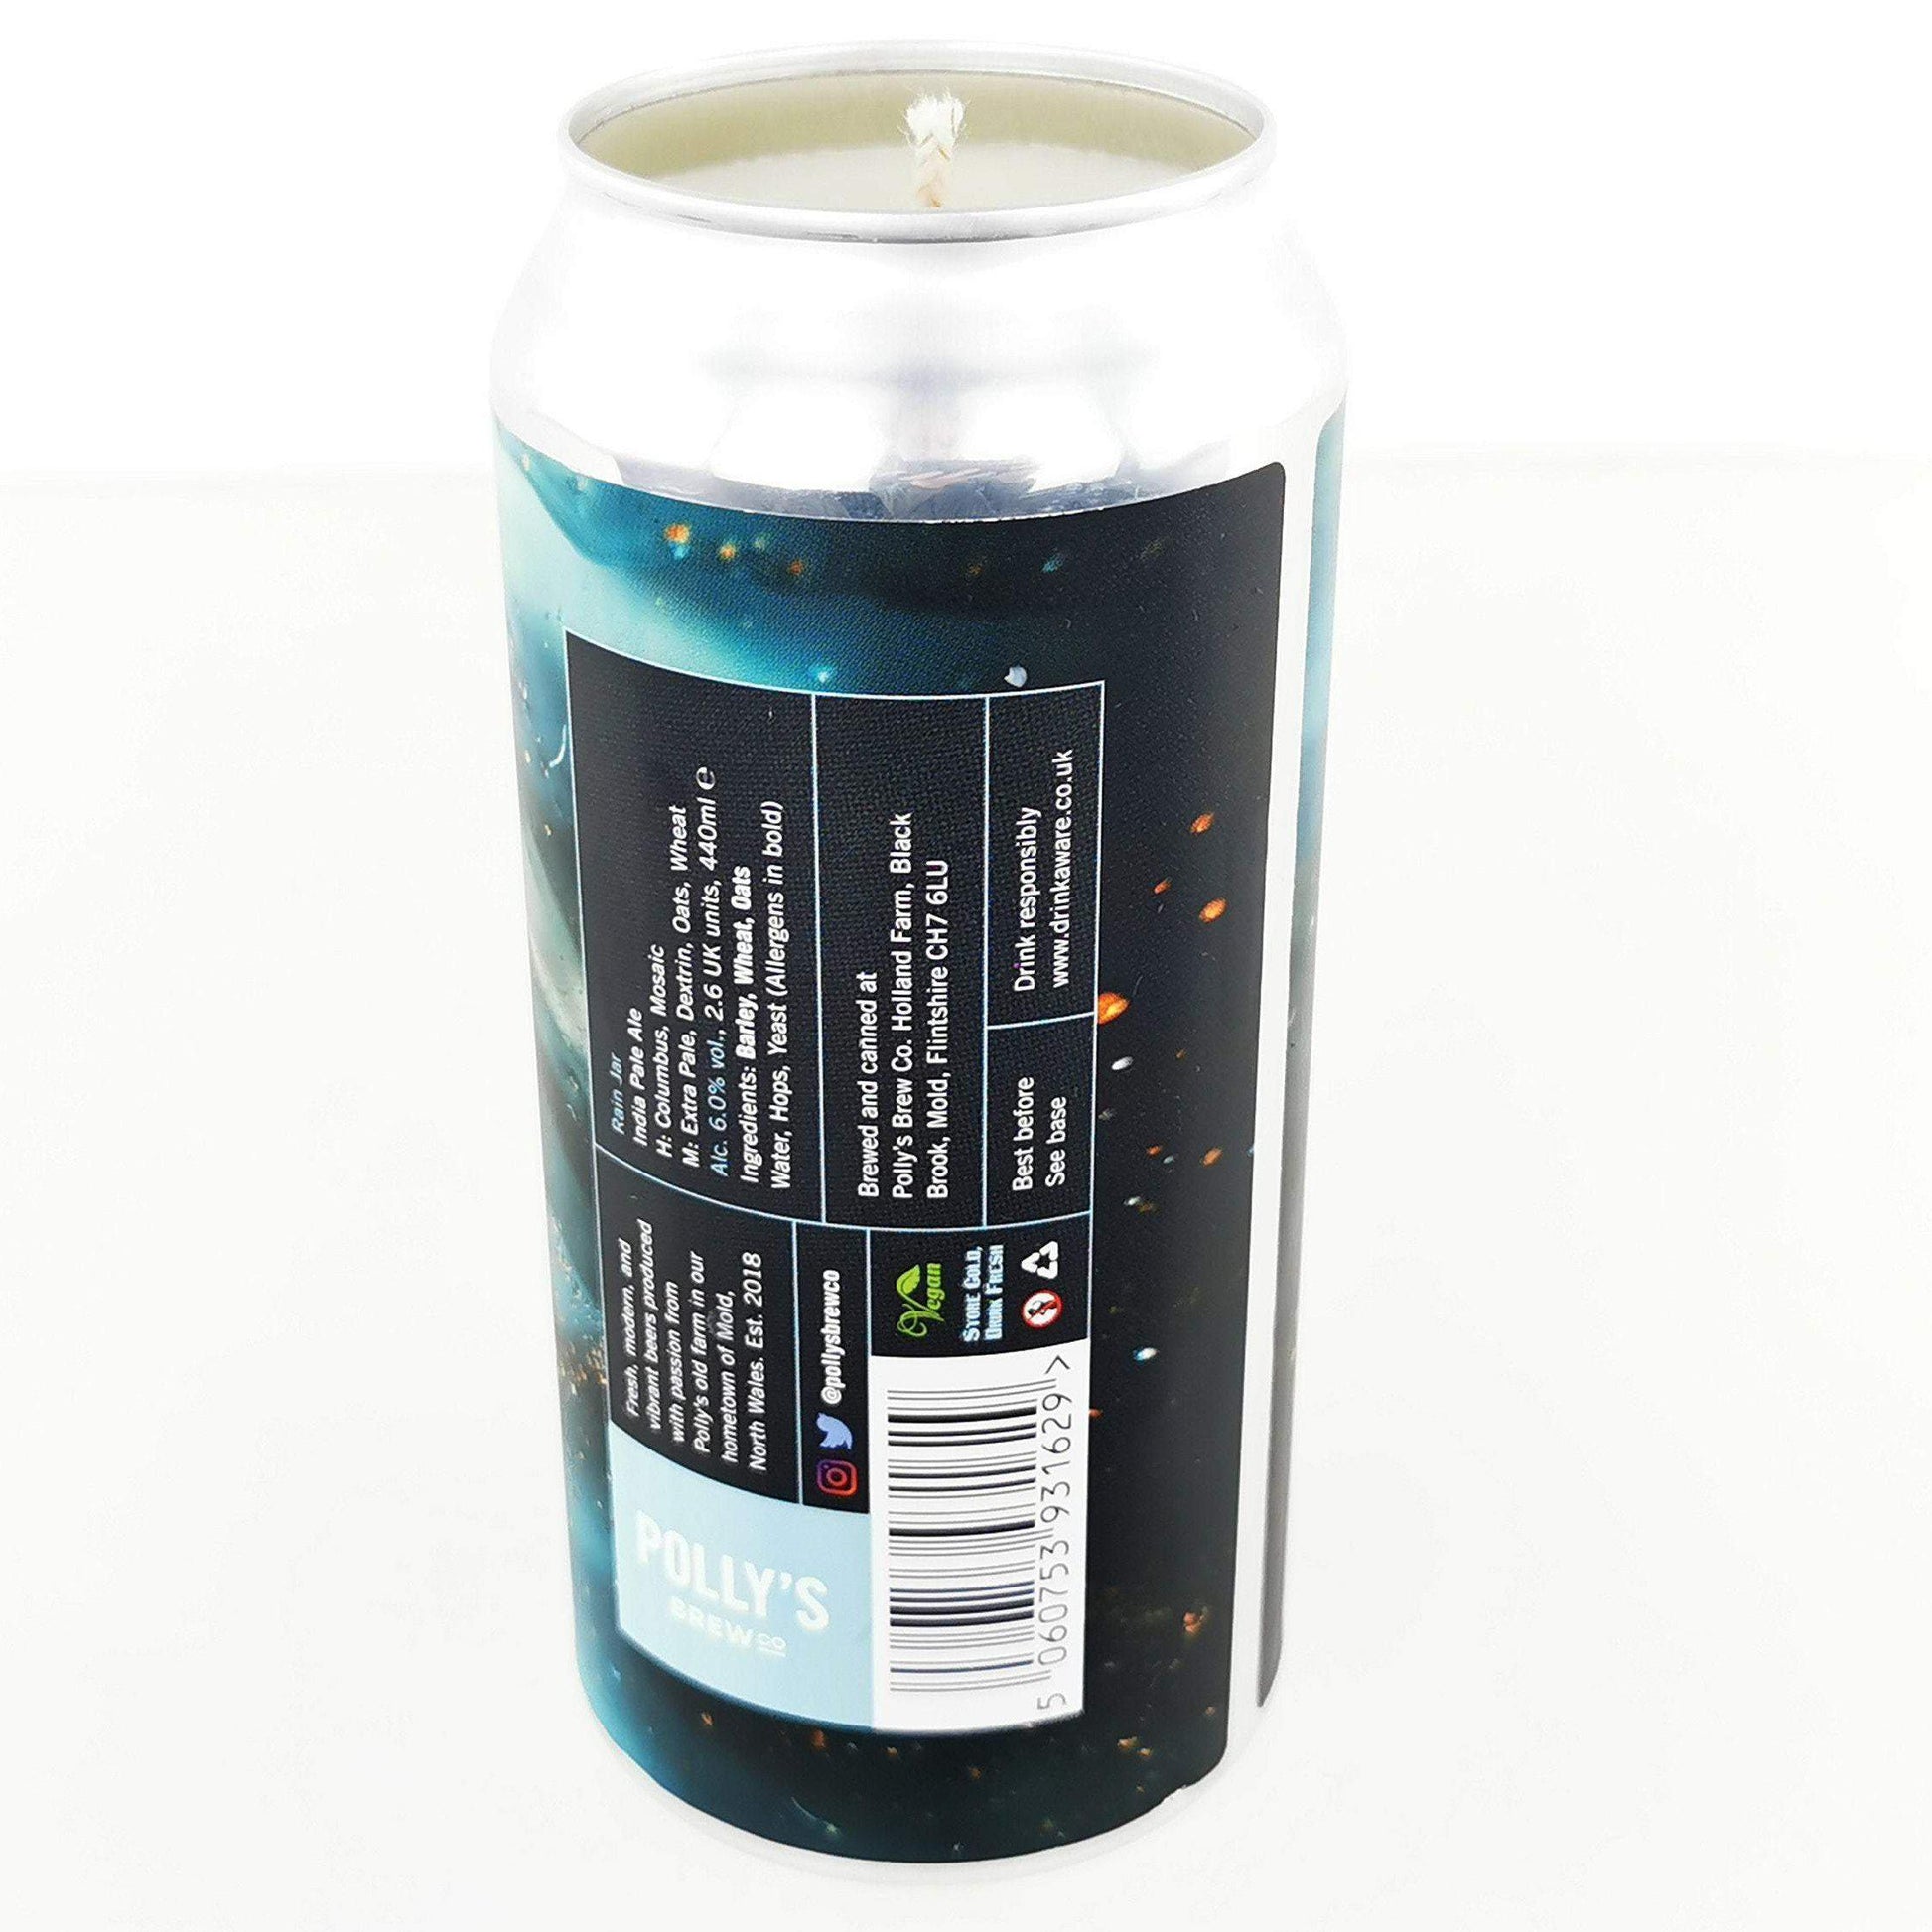 Pollys Rain Jar Craft Beer Can Candle-Beer Can Candles-Adhock Homeware